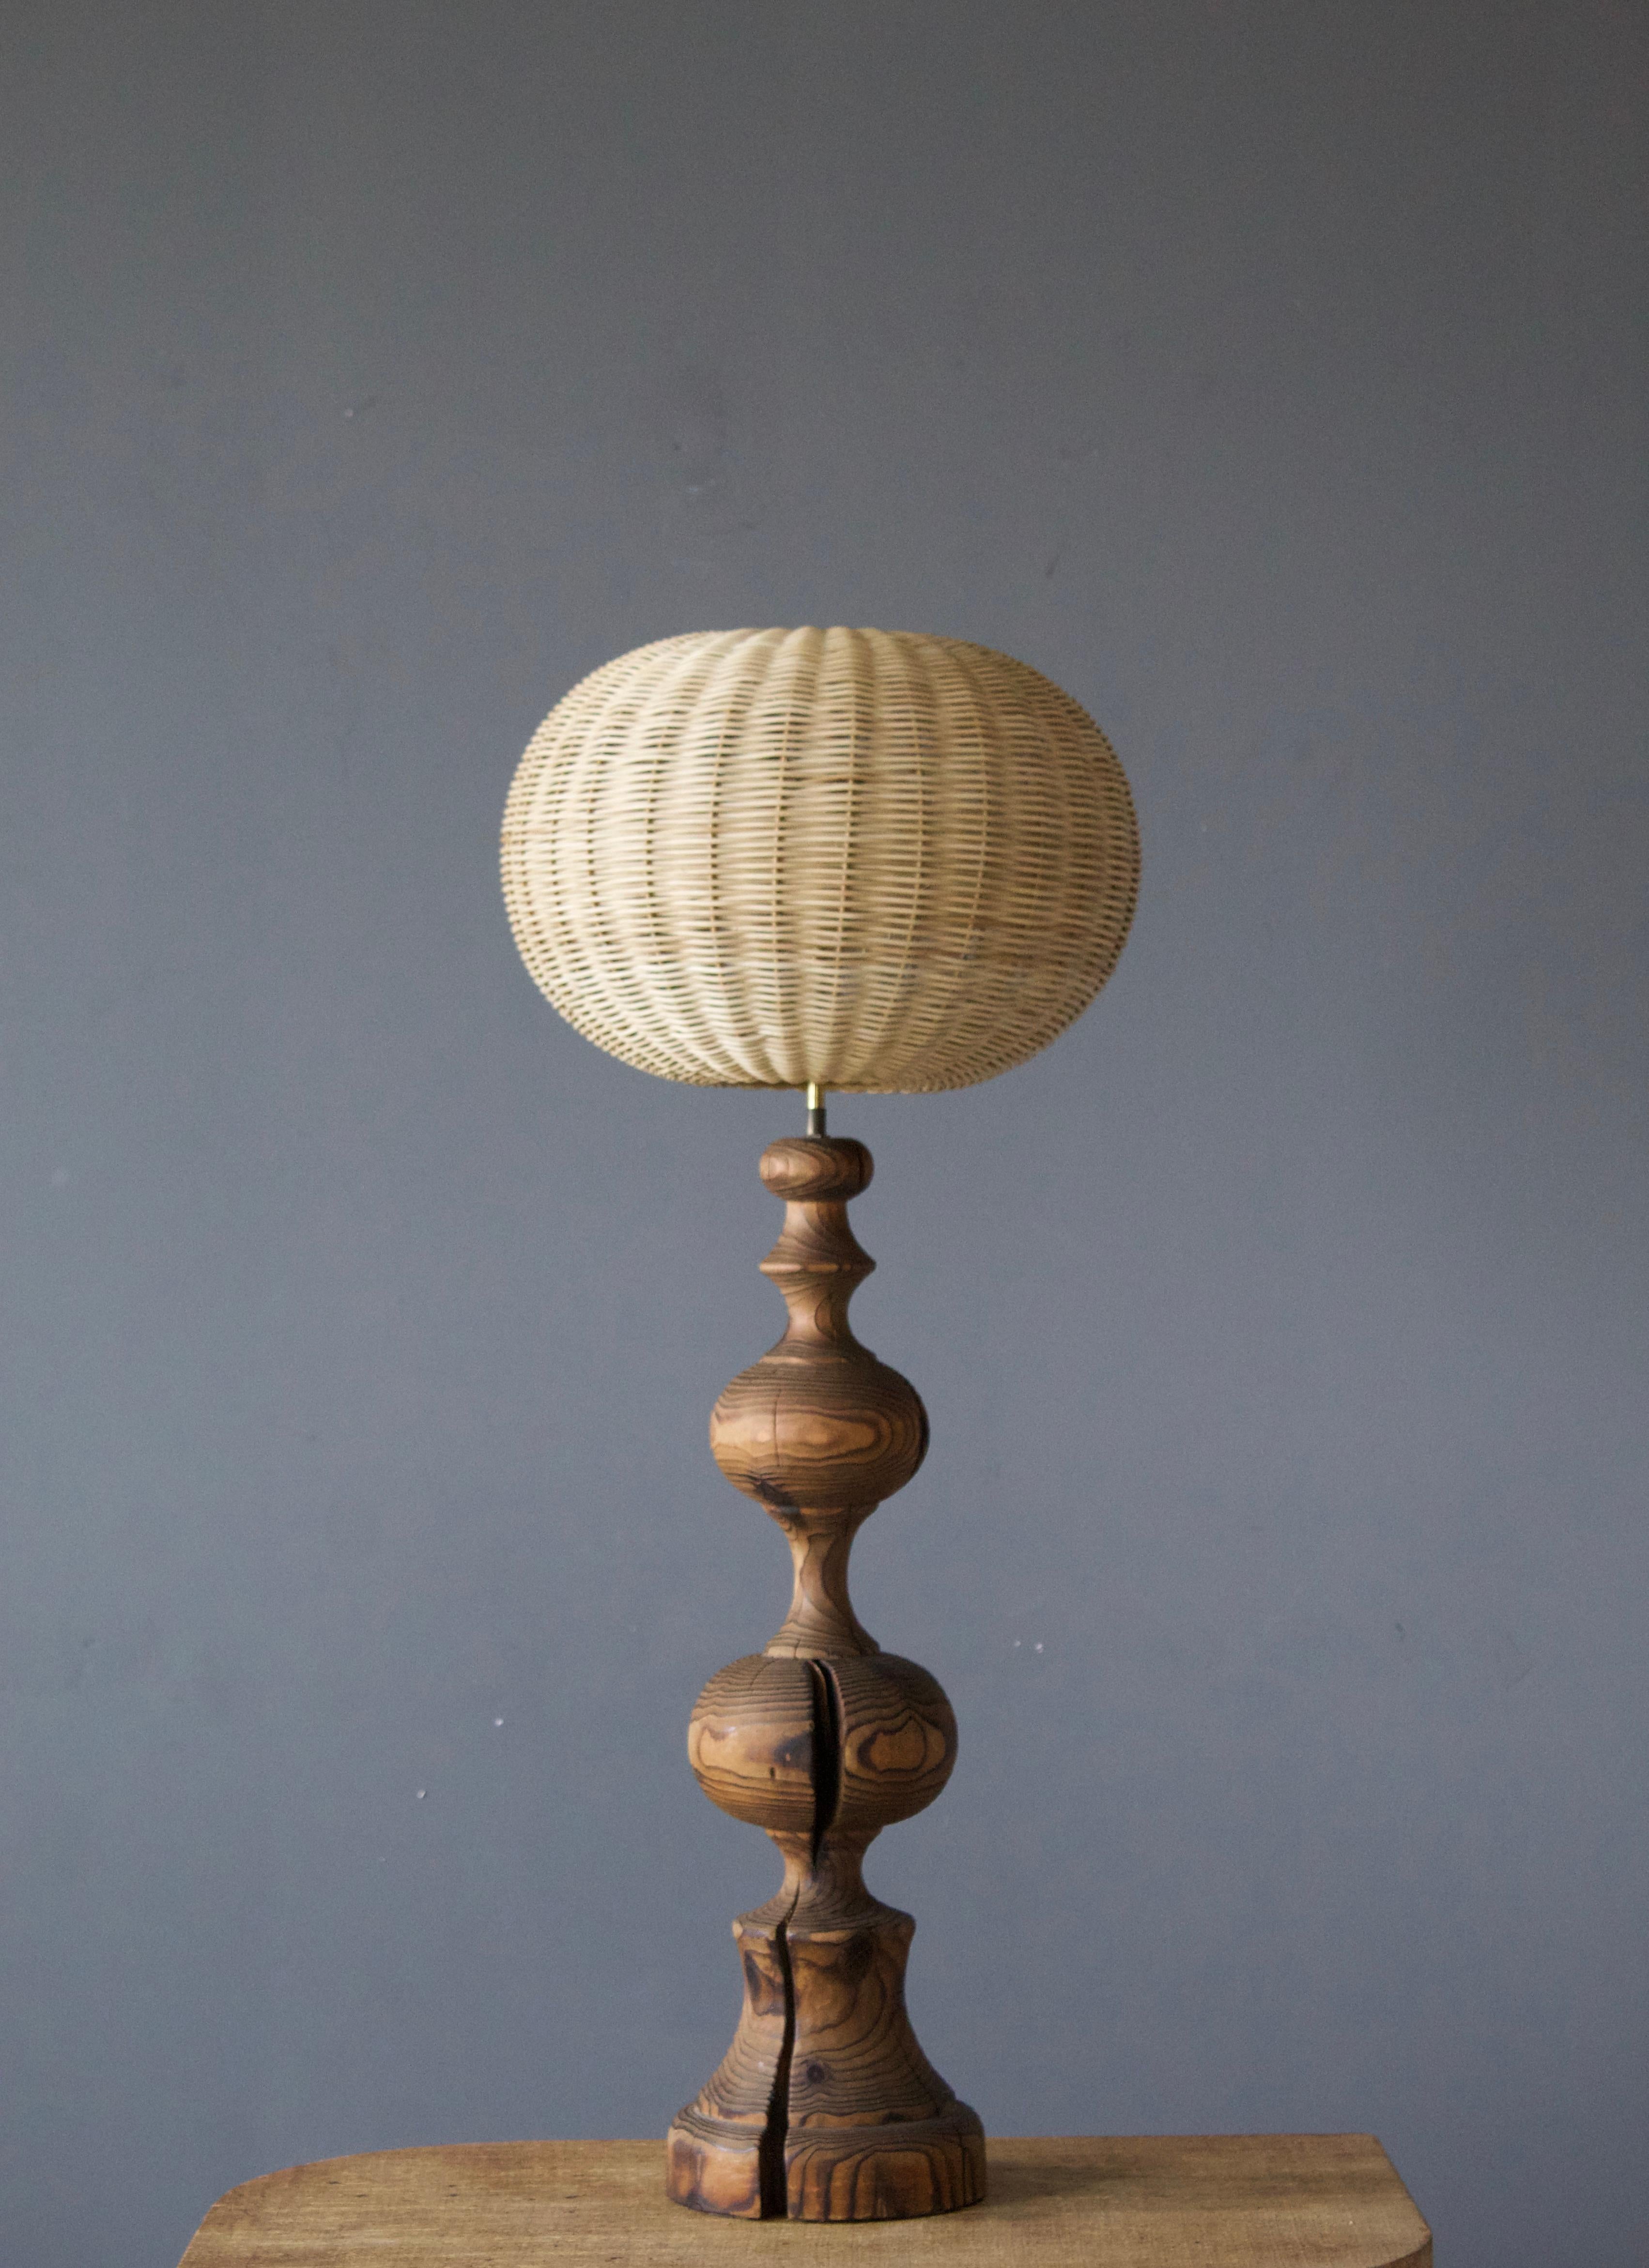 A table lamp, produced in Italy, 1970s. Finely turned solid pine.

Stated dimensions exclude lampshade, height includes socket. Illustrated model rattan lampshade can be included in purchase upon request.

Other designers of the period include